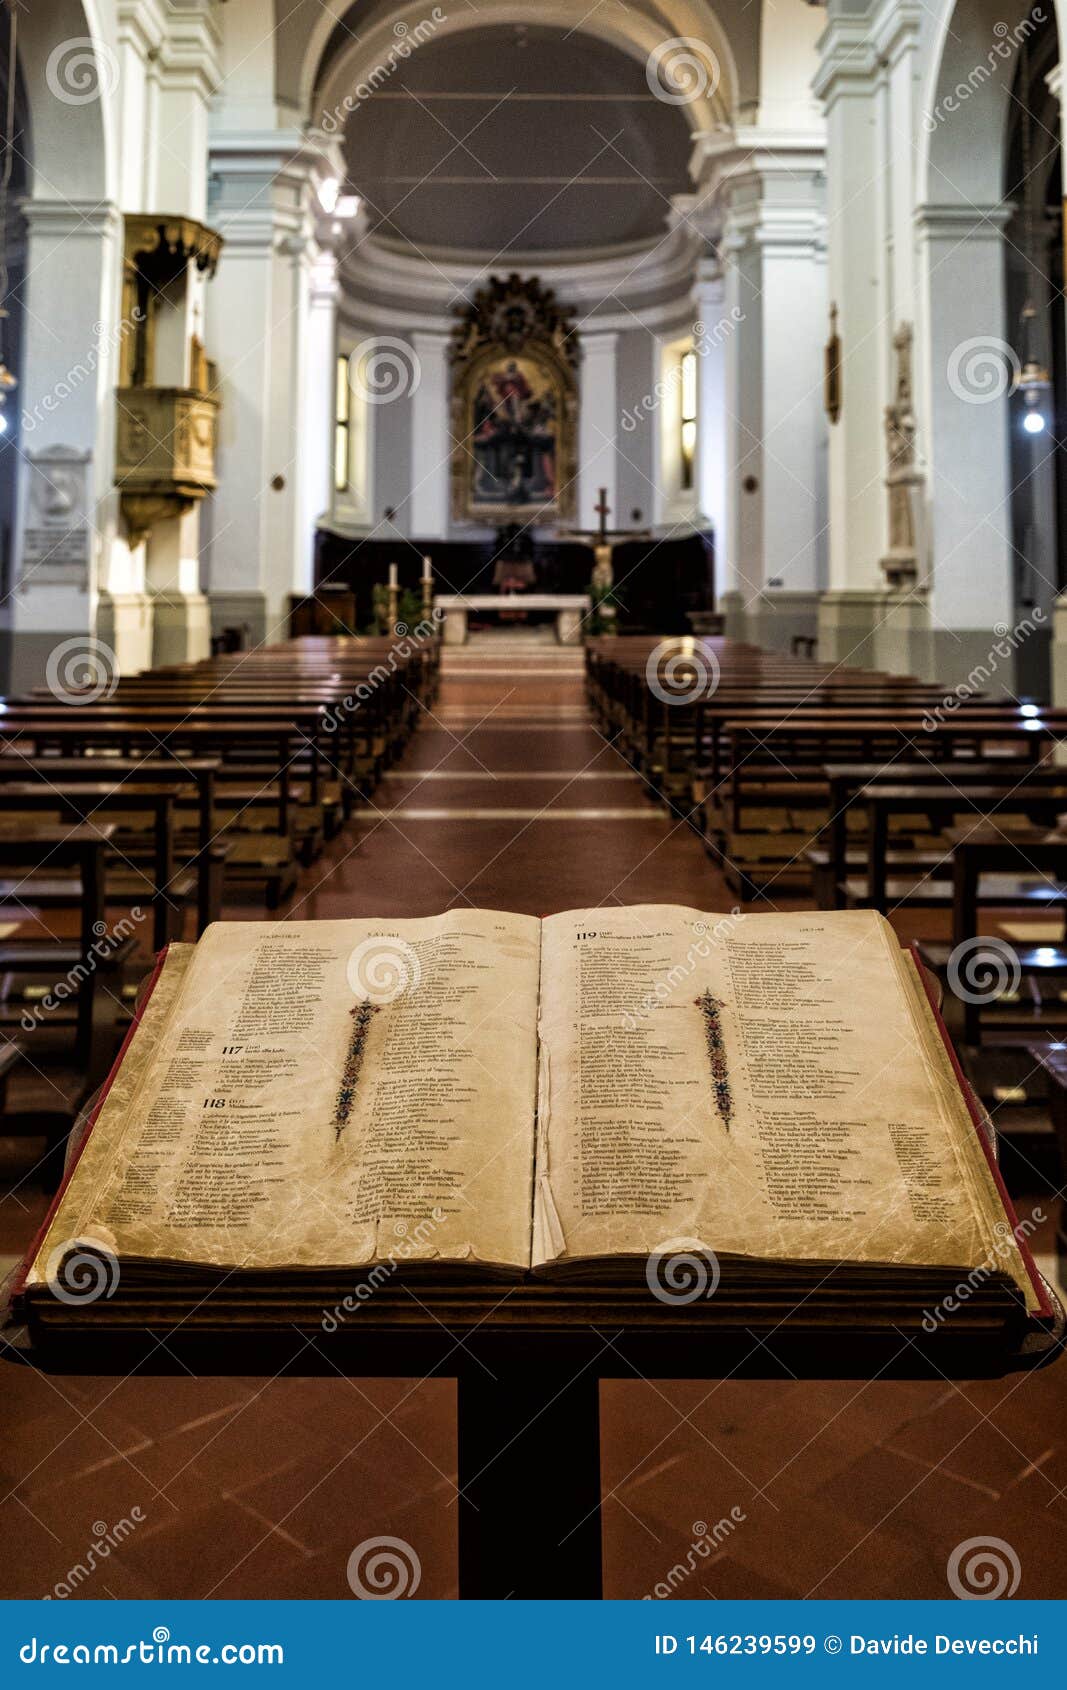 a bible open on a lectern at the entrance of a catholic church in urbino, central italy